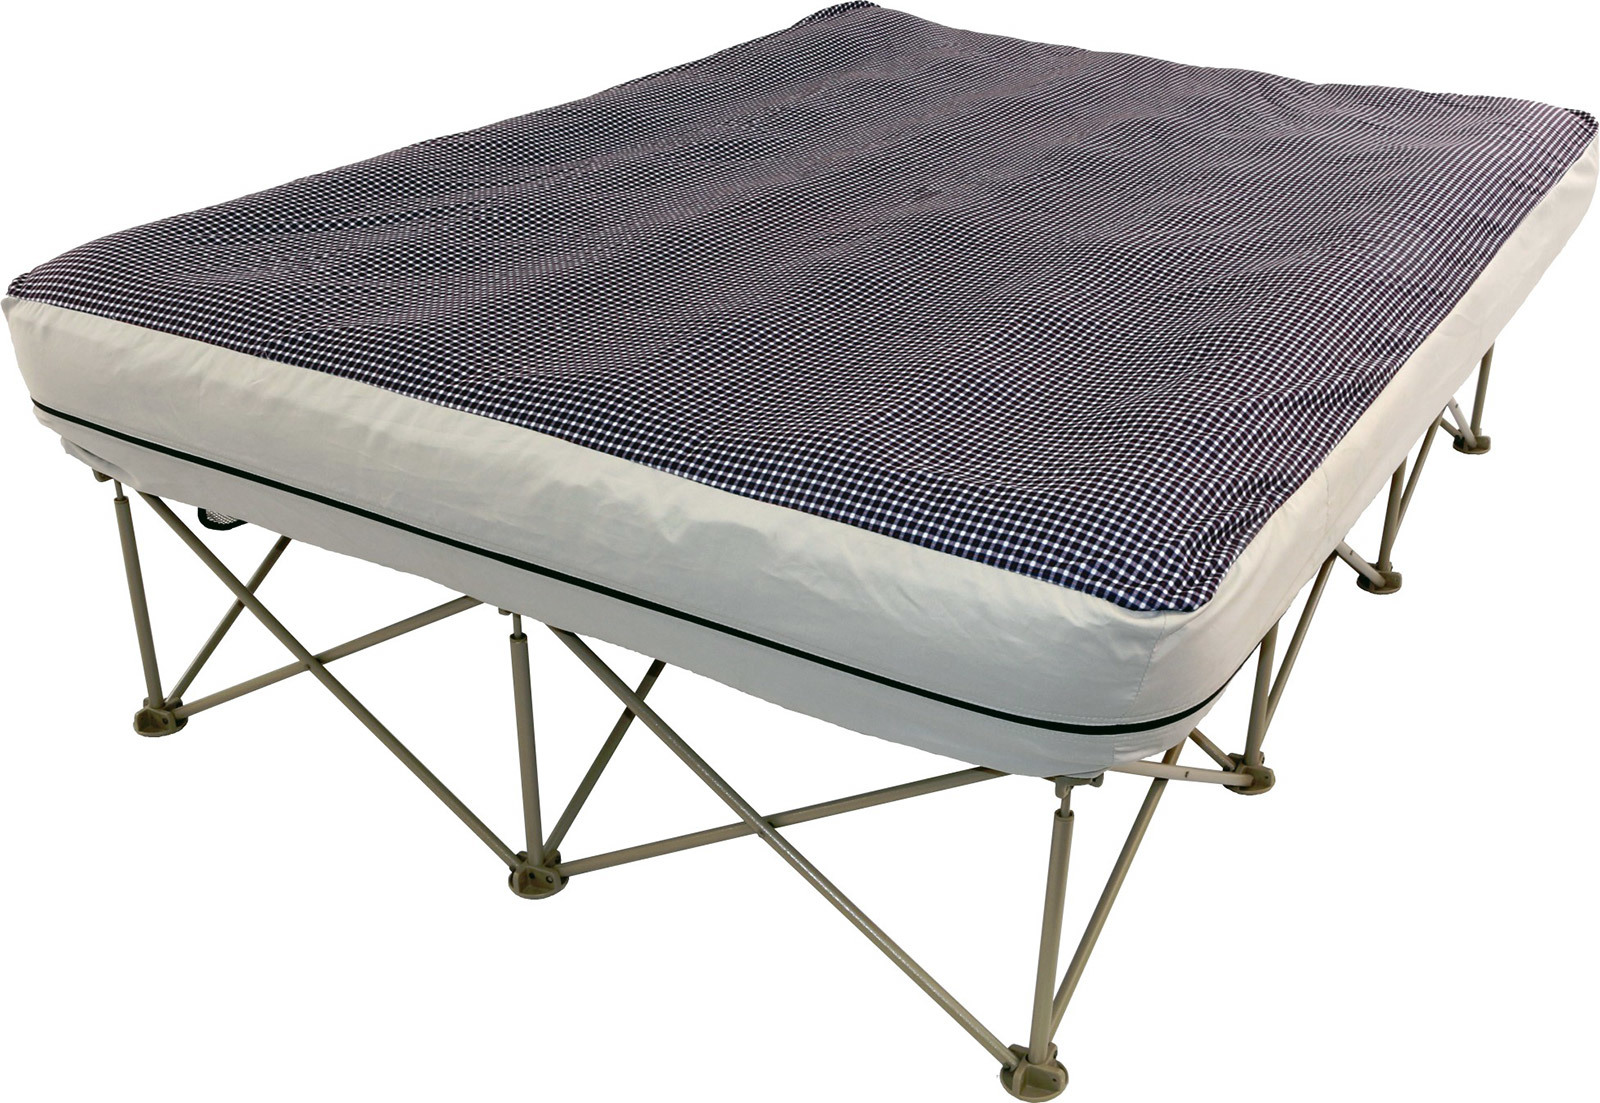 oztrail anywhere bed queen mattress